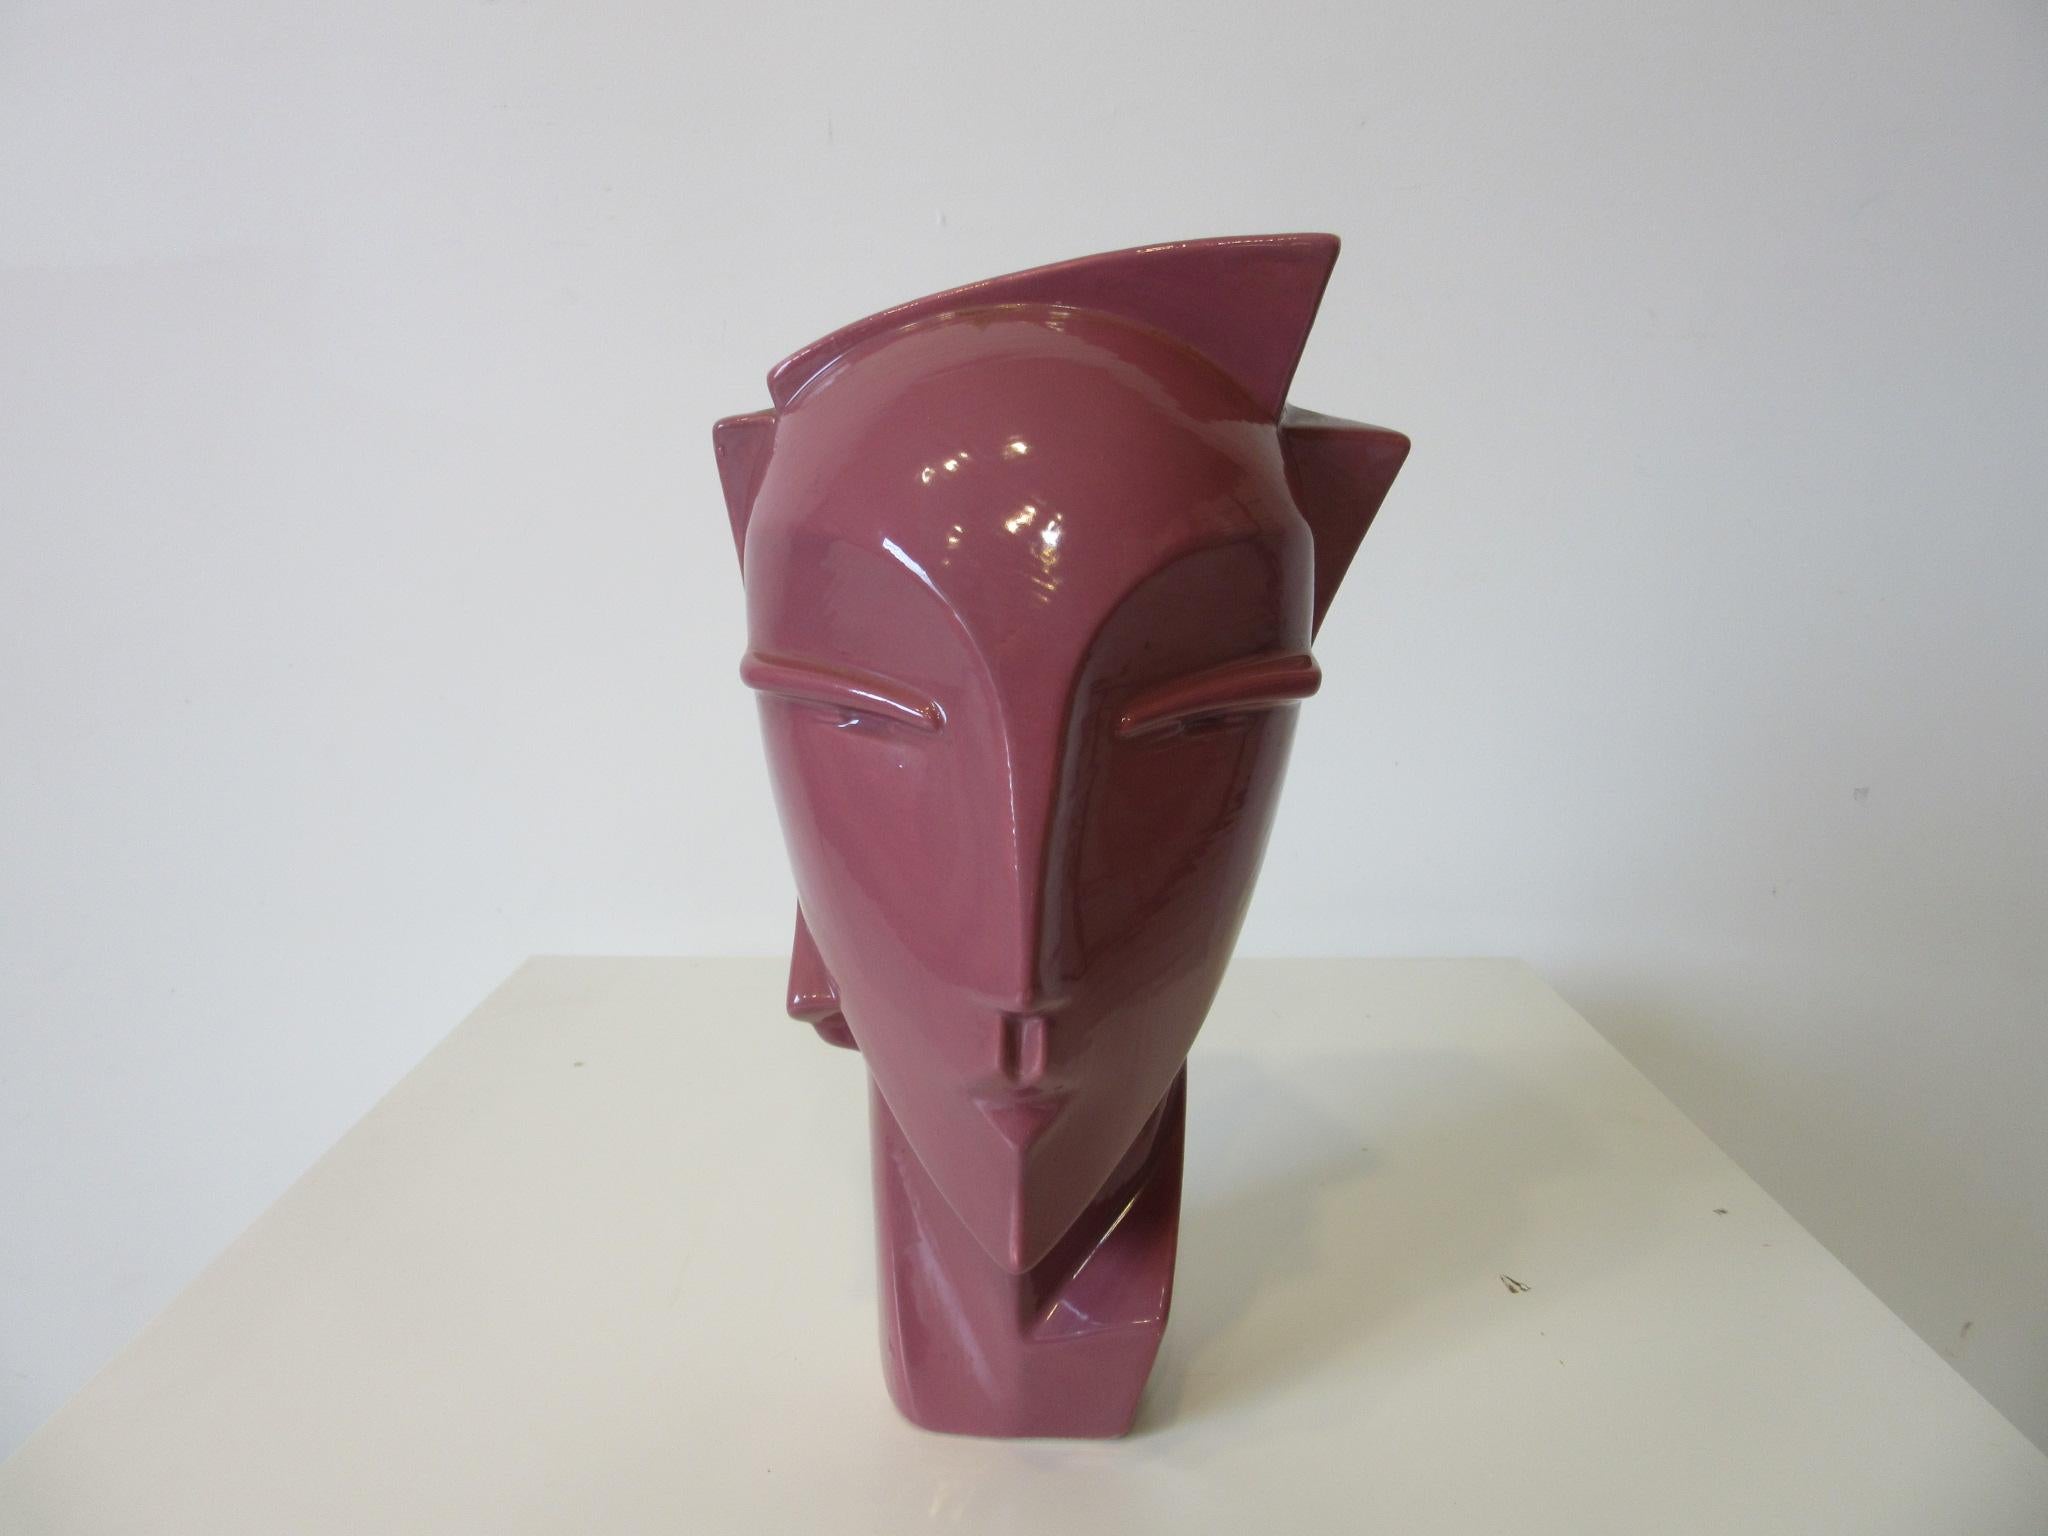 A glazed pottery head sculpture in the style of new wave / Art Deco and Grace Jones in the color of the 1980s manufactured by the Haeger Pottery company.